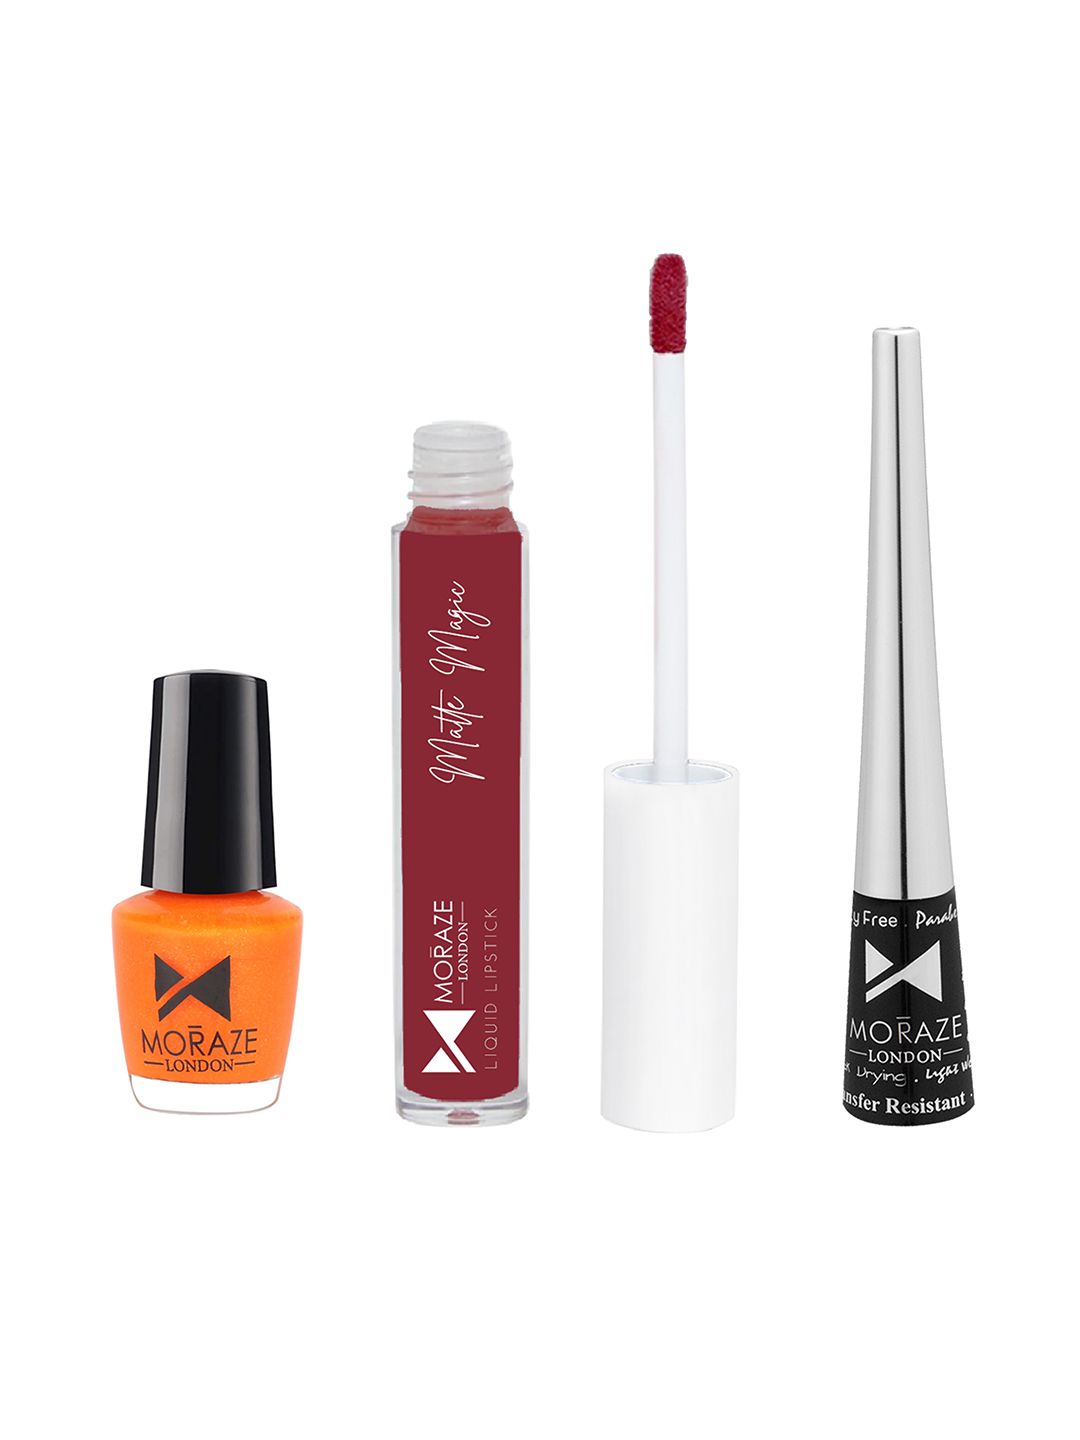 Moraze Combo Pack of Nail Polish (Chitty), Eyeliner, & Liquid Lipstick (No Regret) Price in India